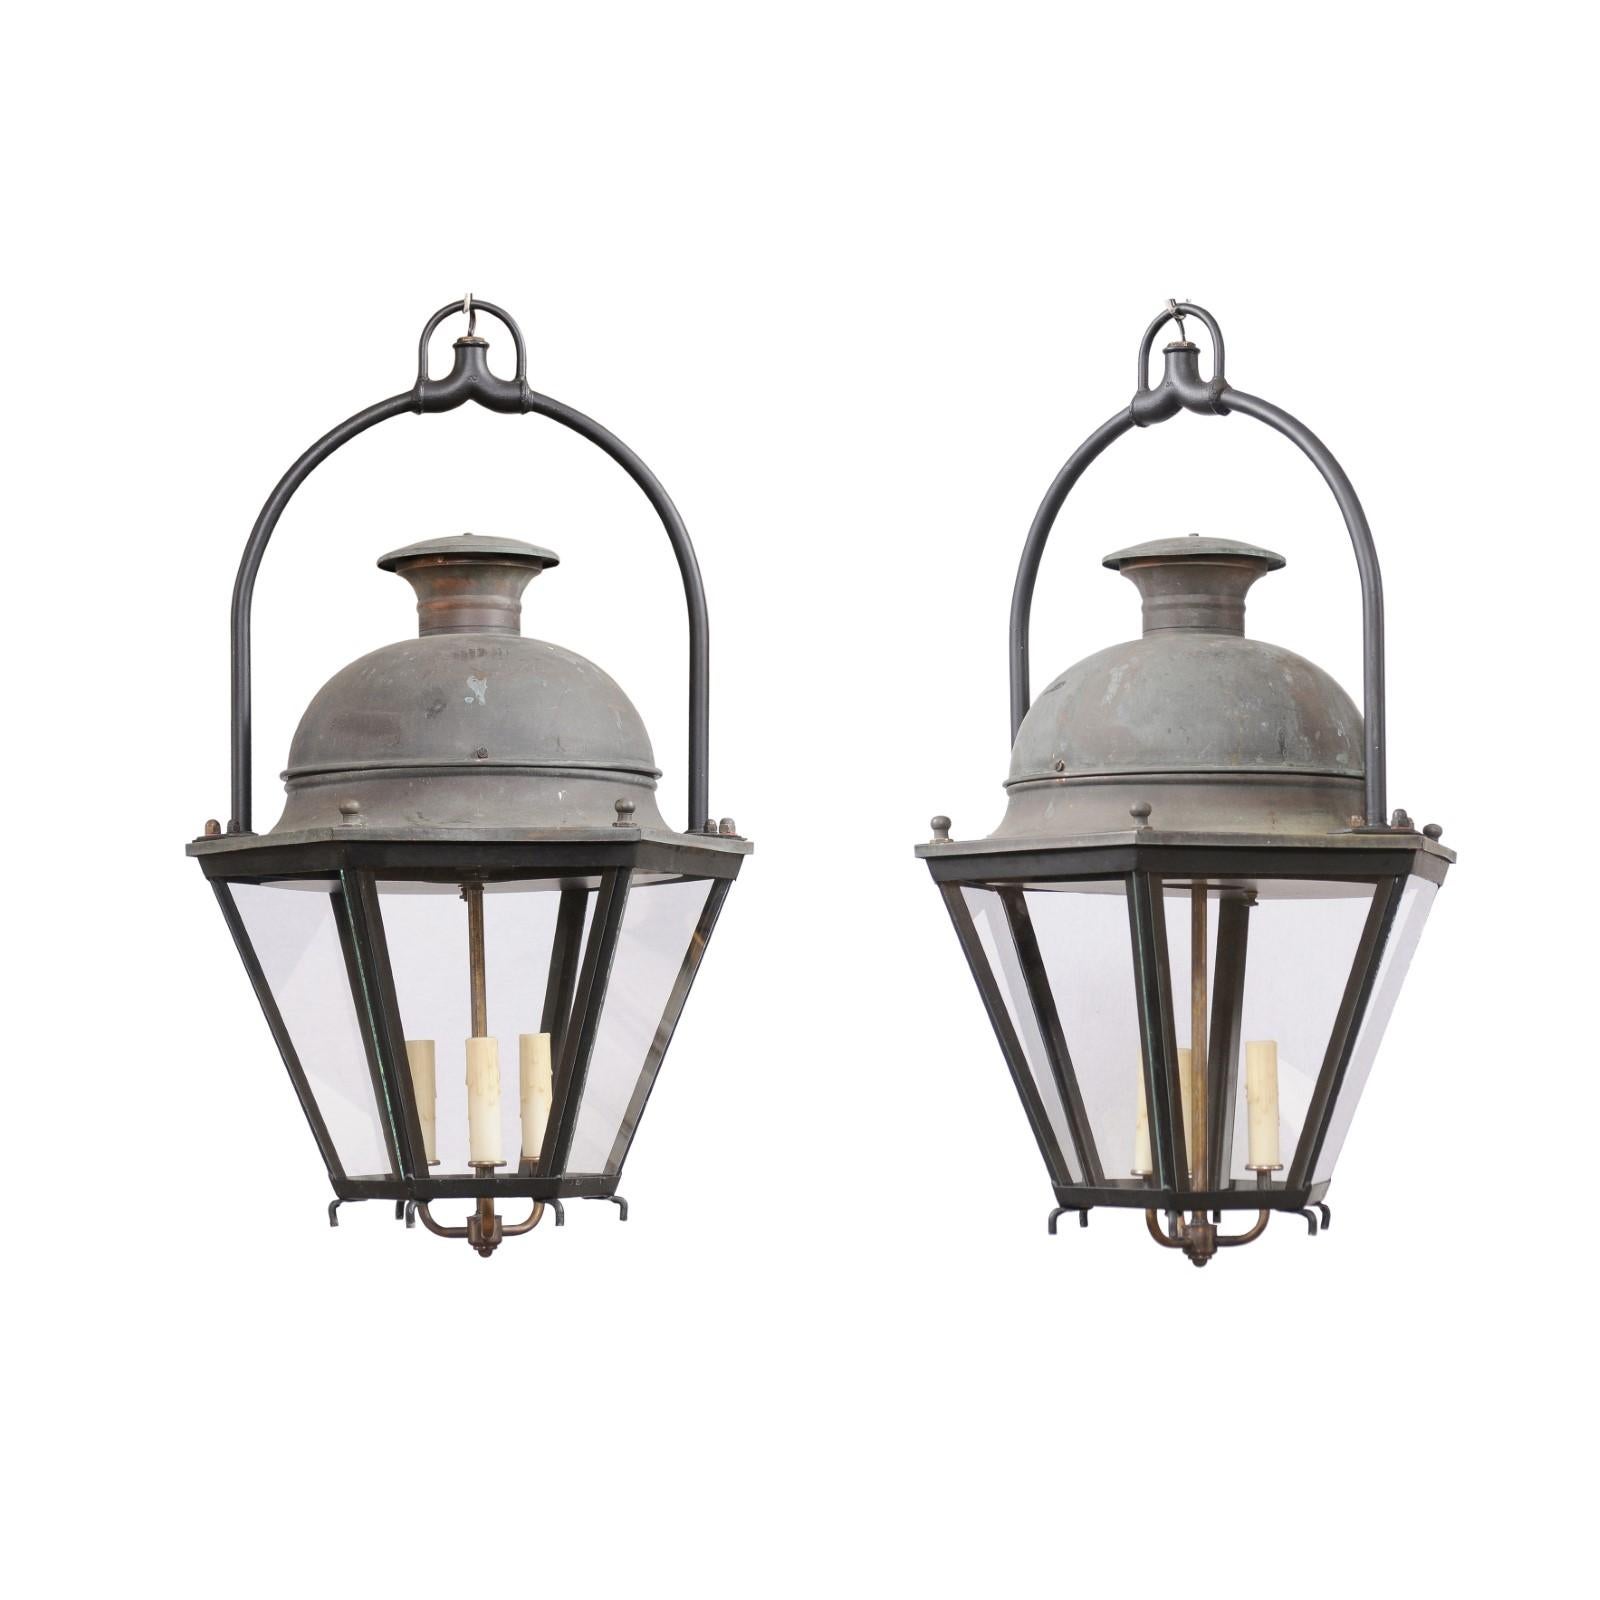 Two French hexagonal copper lanterns from the 20th century with glass panels, domed tops and three lights. Adorn your home with the captivating allure of these two French hexagonal copper lanterns from the 20th century, each sold individually. Their